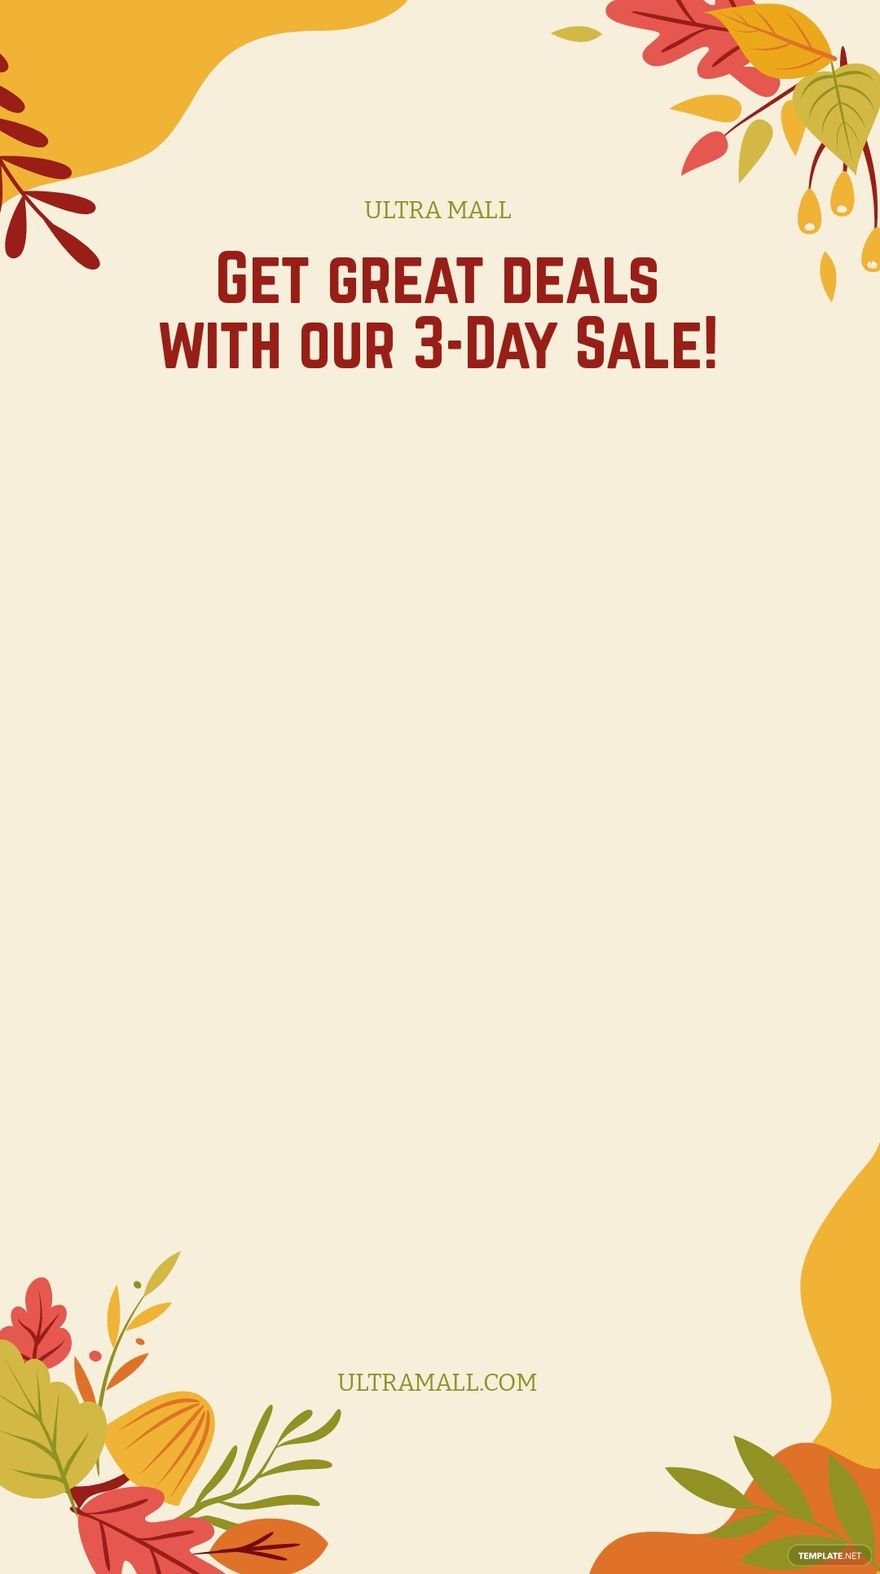 Fall/Autumn Sale Promotion Snapchat Geofilter Template